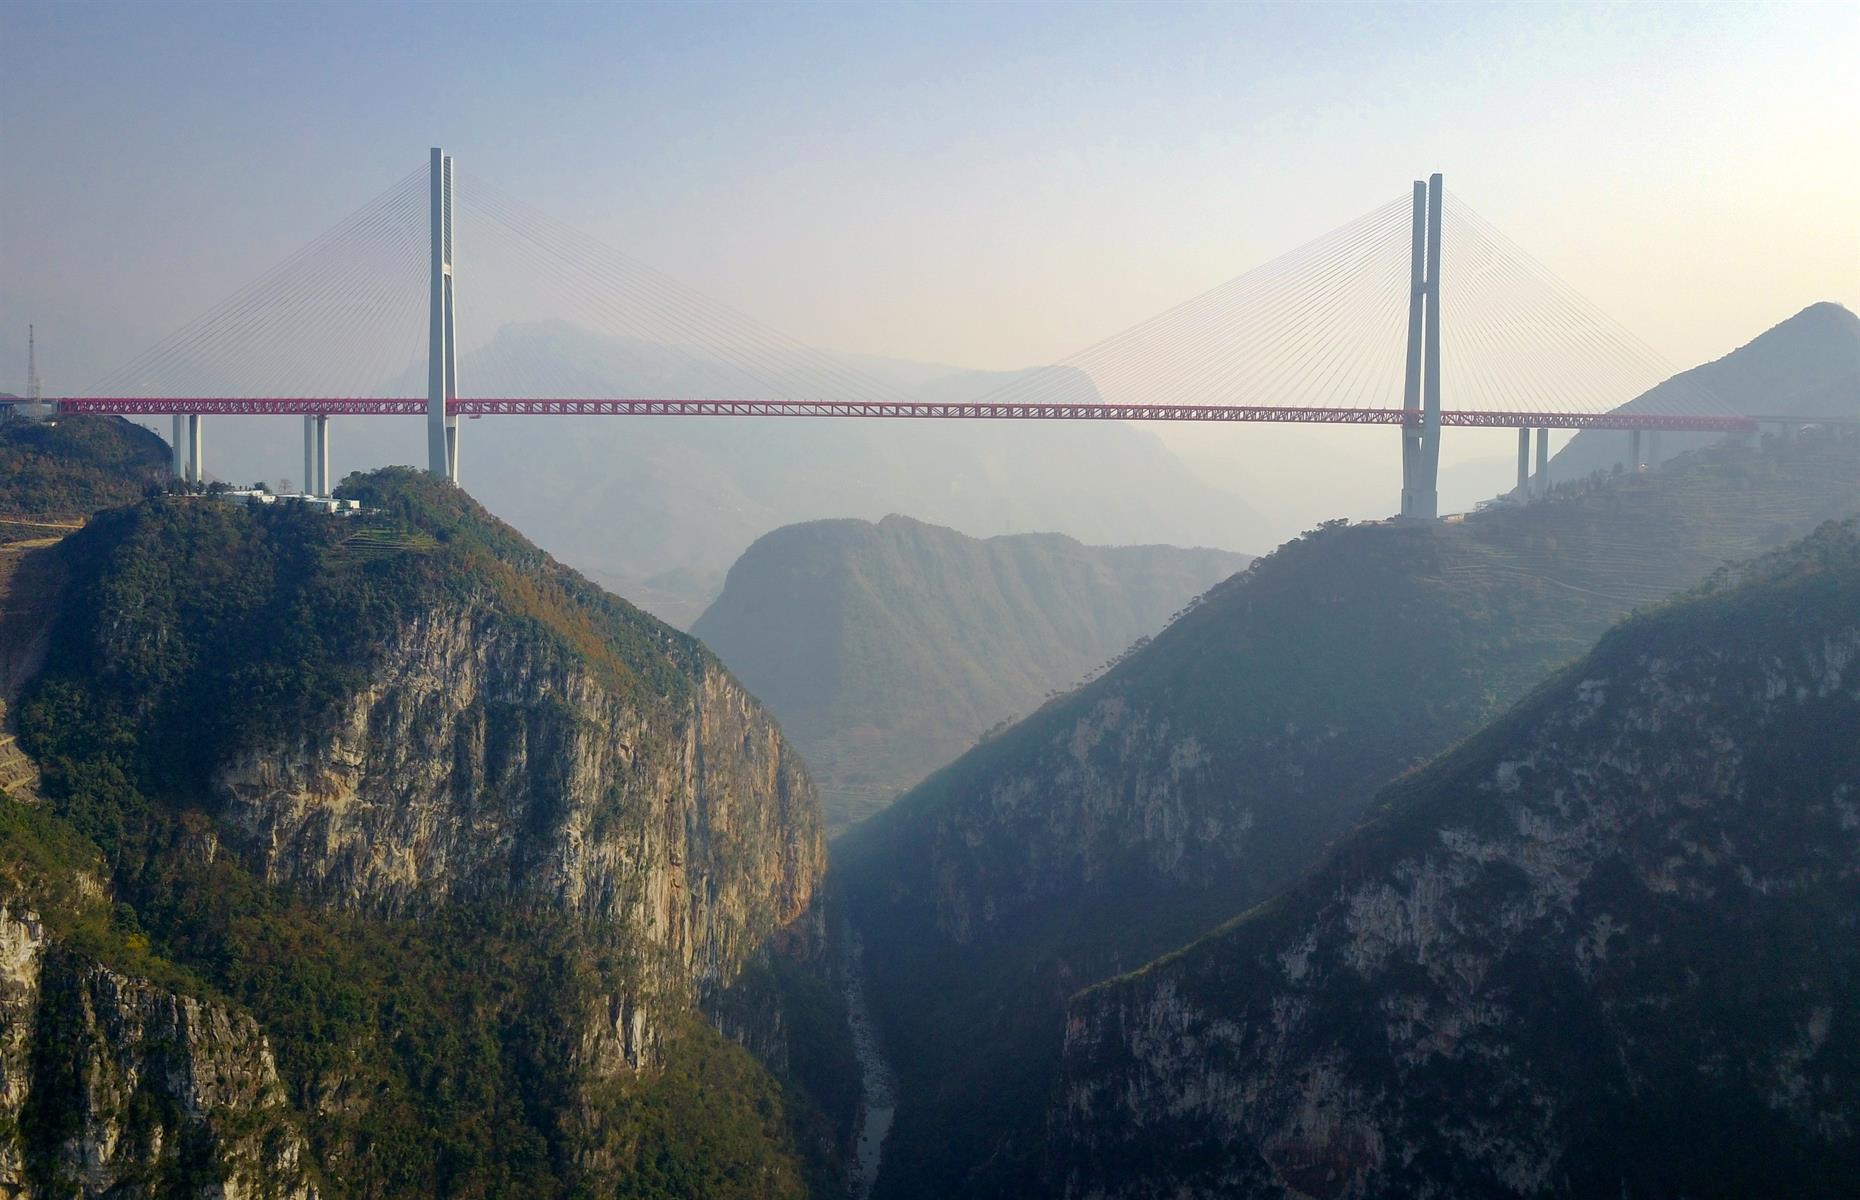 <p>Constructed between Xuanwei in Yunnan province and Liupanshui in Guizhou province in 2016, this mighty mountain overpass soars over the Beipan river in a remote and rugged part of southwestern China. Sitting at 1,854 feet (565m) above ground, the impressive cableway structure is the world's highest bridge. It is also pretty long at 2,363 feet (720m).</p>  <p><strong><a href="https://www.loveexploring.com/galleries/104228/breathtaking-bridges-you-can-walk-across">Discover the beautiful bridges you can walk across</a></strong></p>